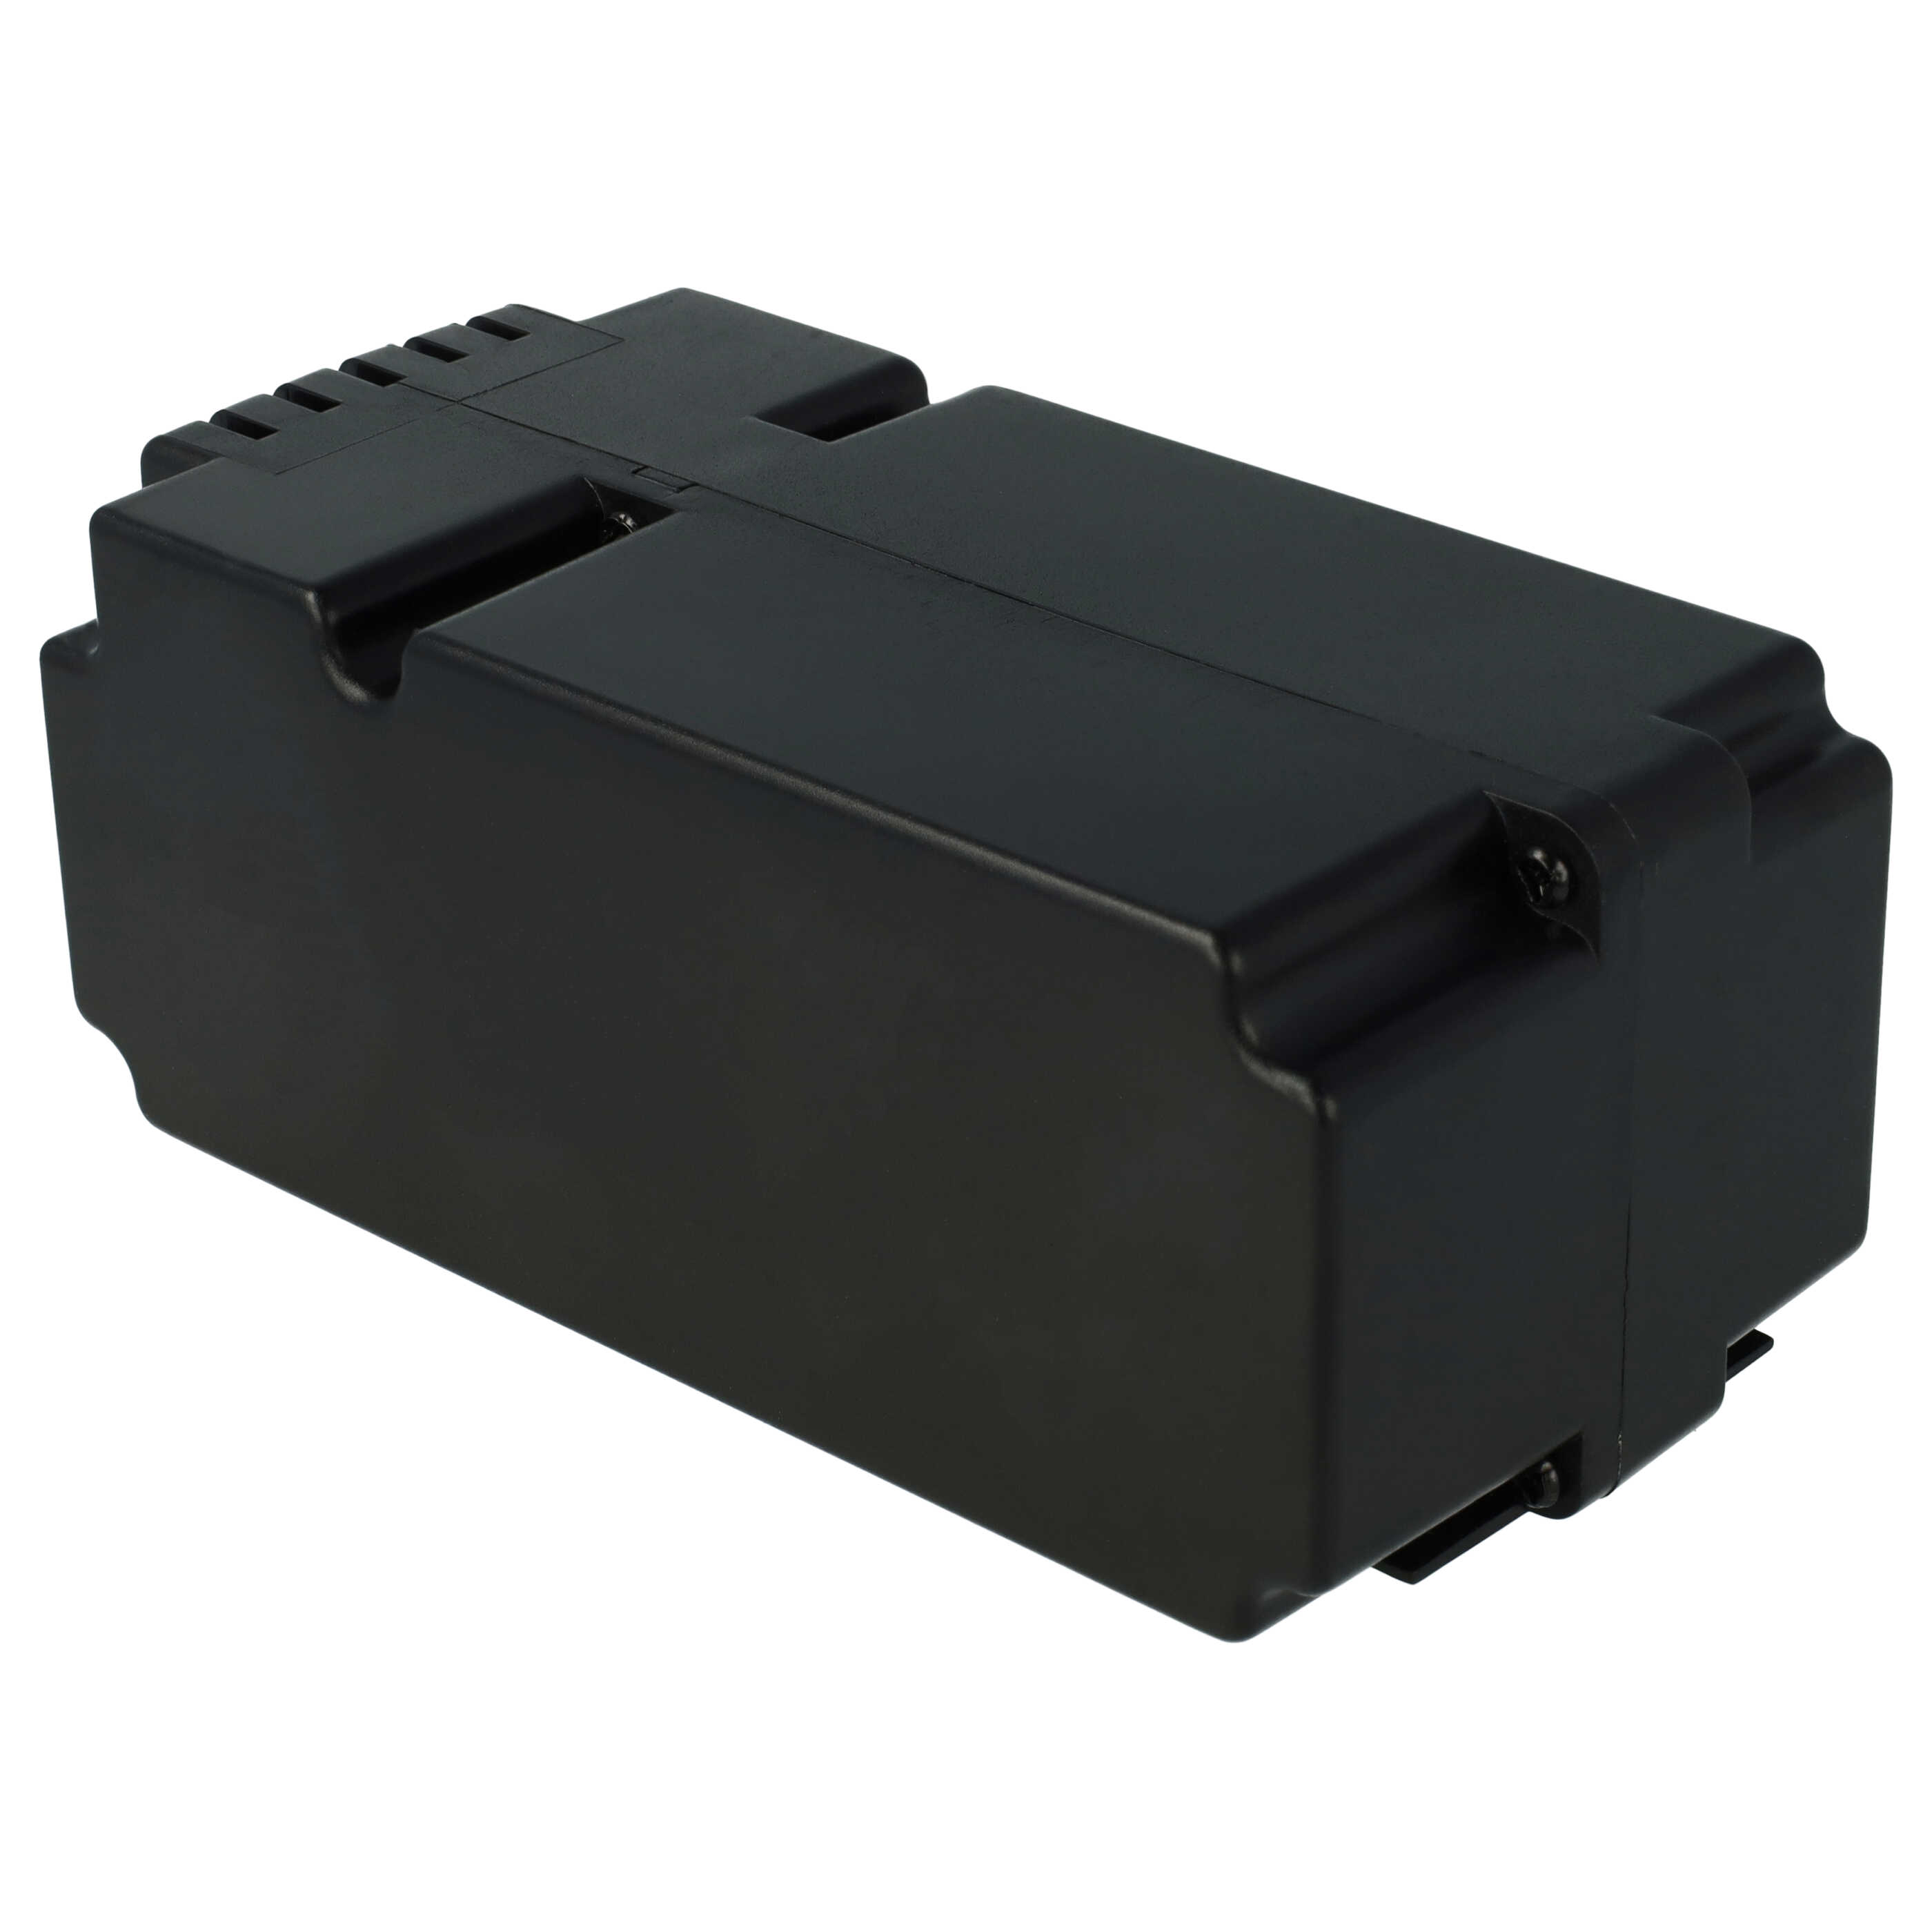 Lawnmower Battery Replacement for Yard Force 862601, 862615, 0862622, 0862622001 - 2500mAh 25.2V Li-Ion